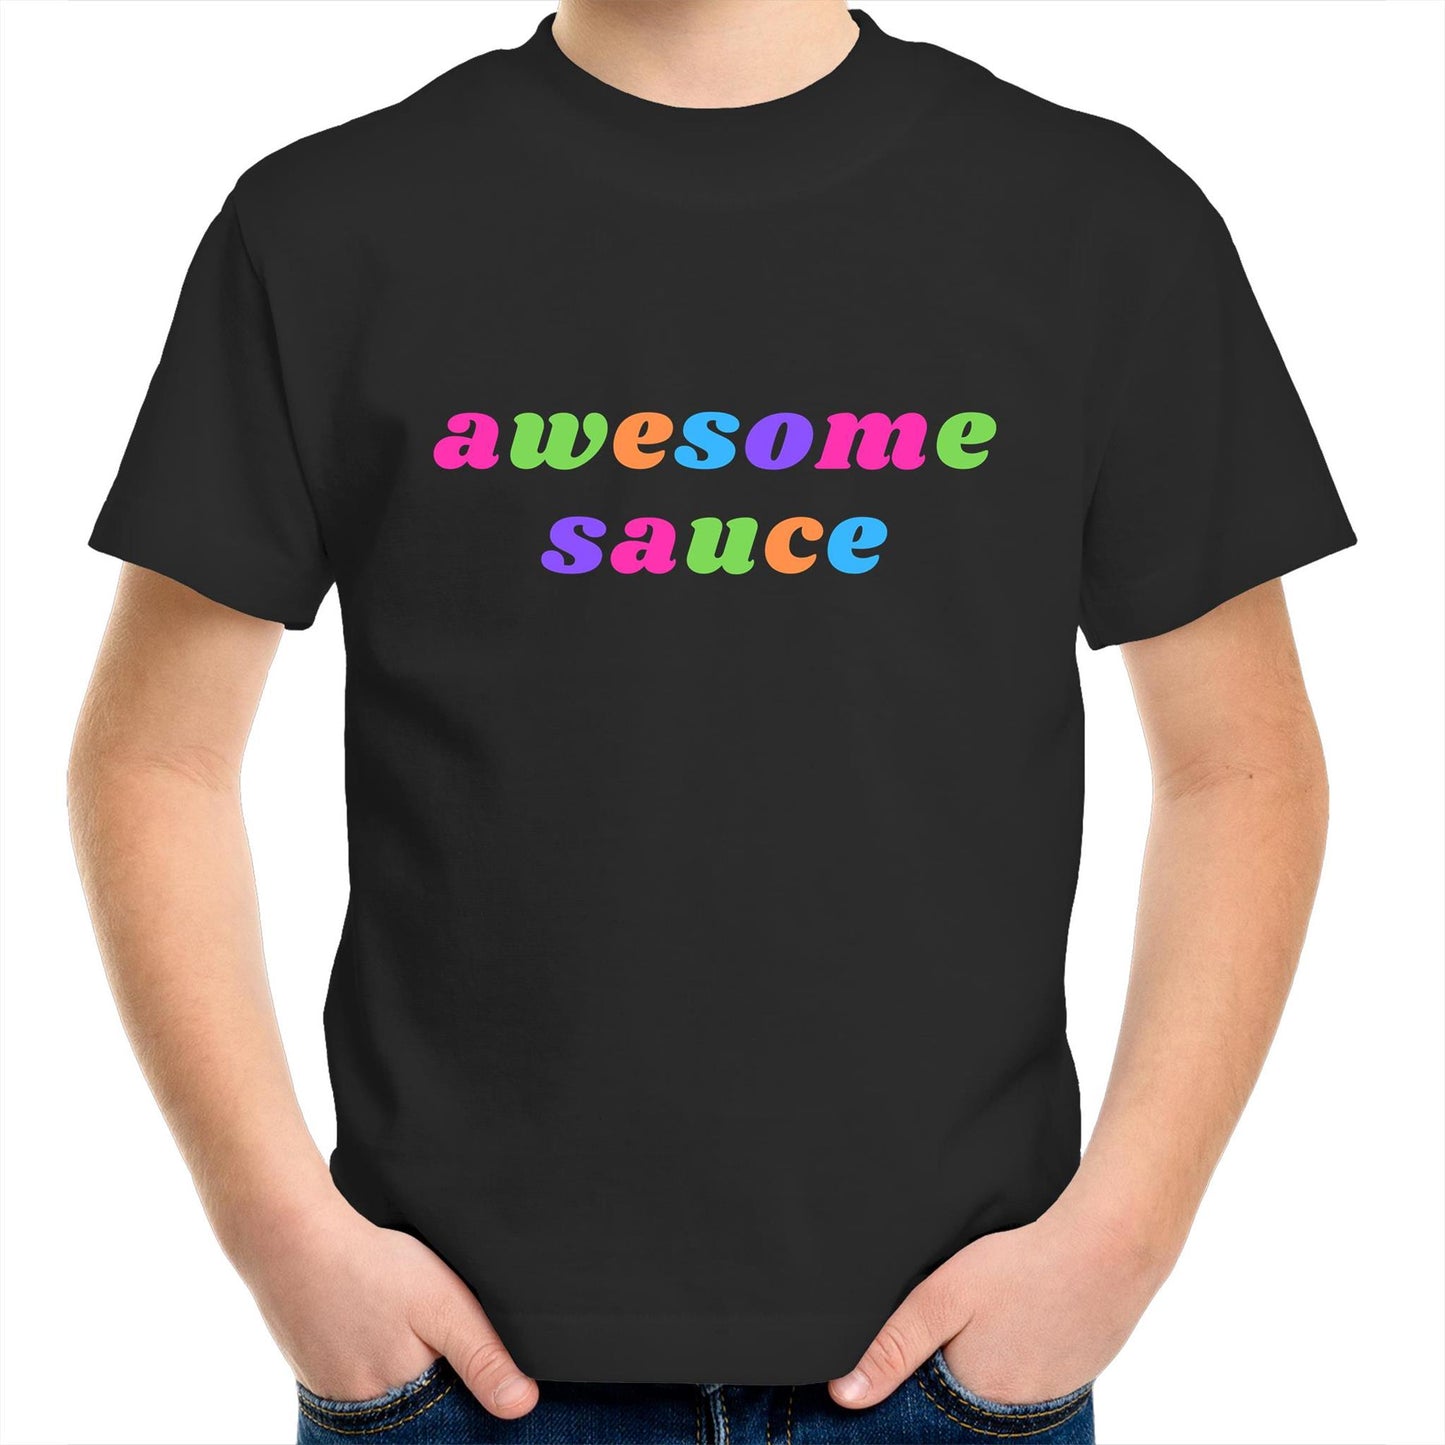 Awesome Sauce - Kids Youth Crew T-Shirt Black Kids Youth T-shirt